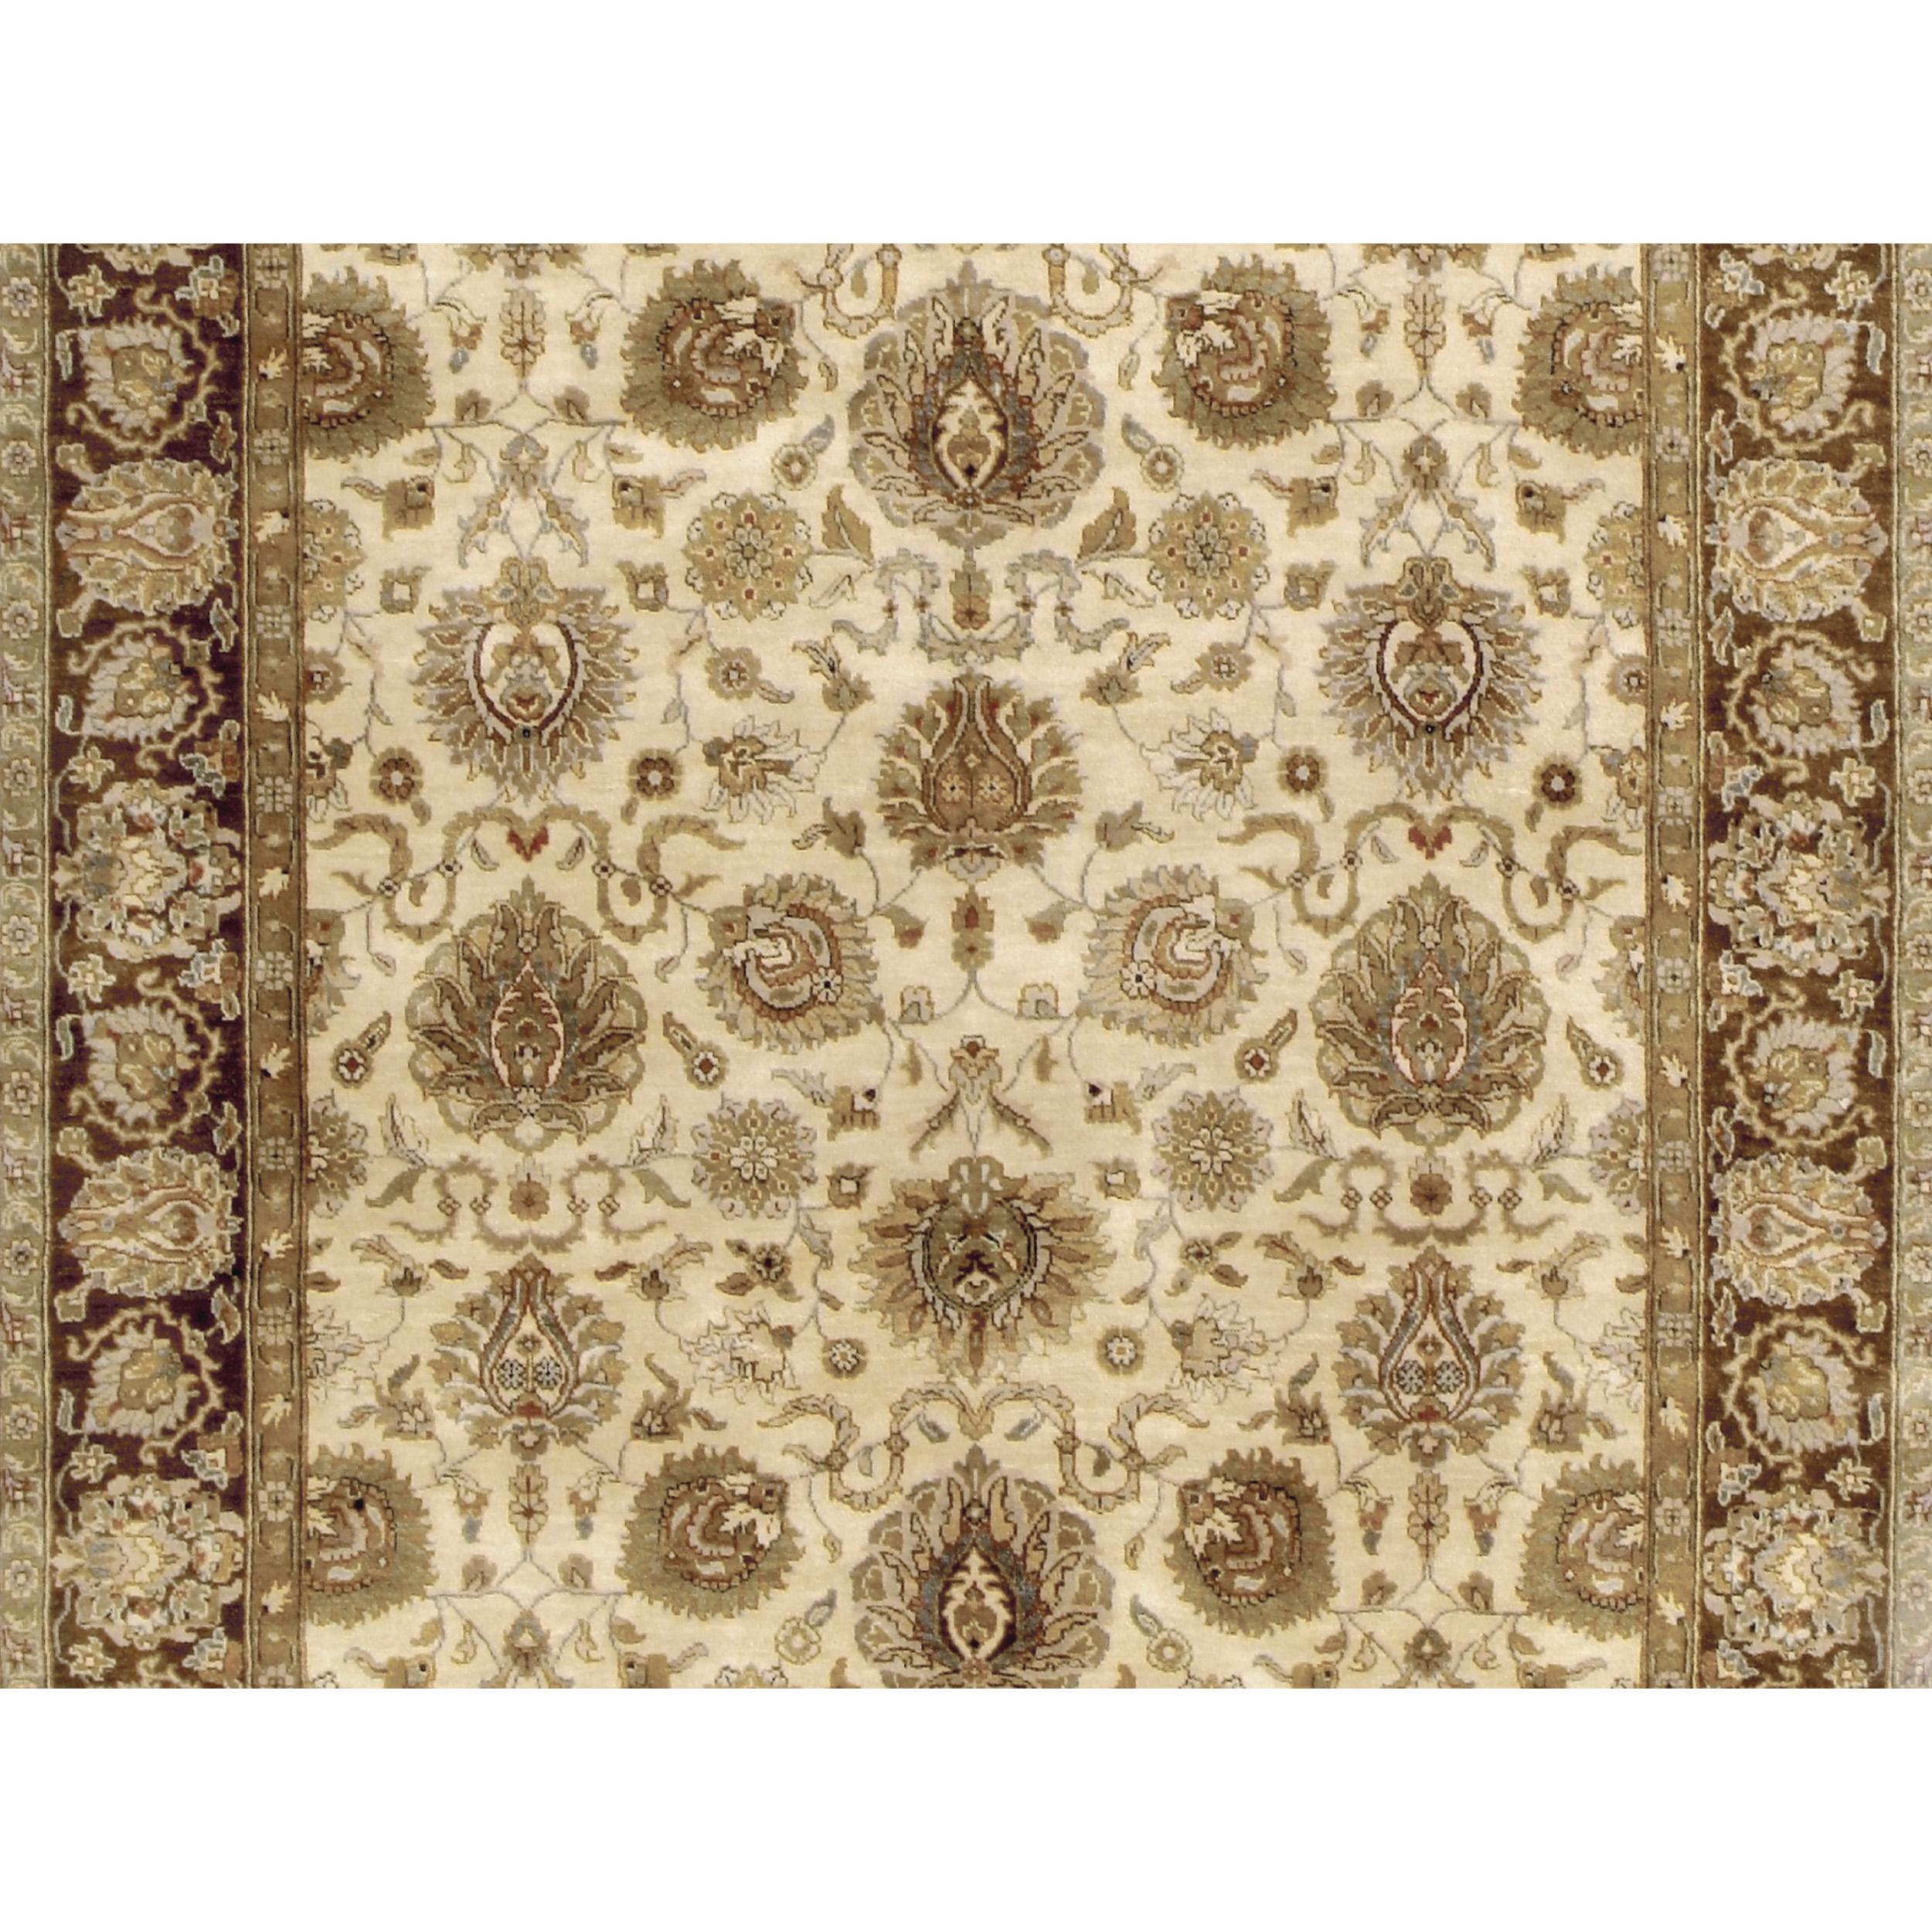 Luxury Traditional Hand-Knotted Sultanabad Cream/Brown 12X15 Rug In New Condition For Sale In Secaucus, NJ